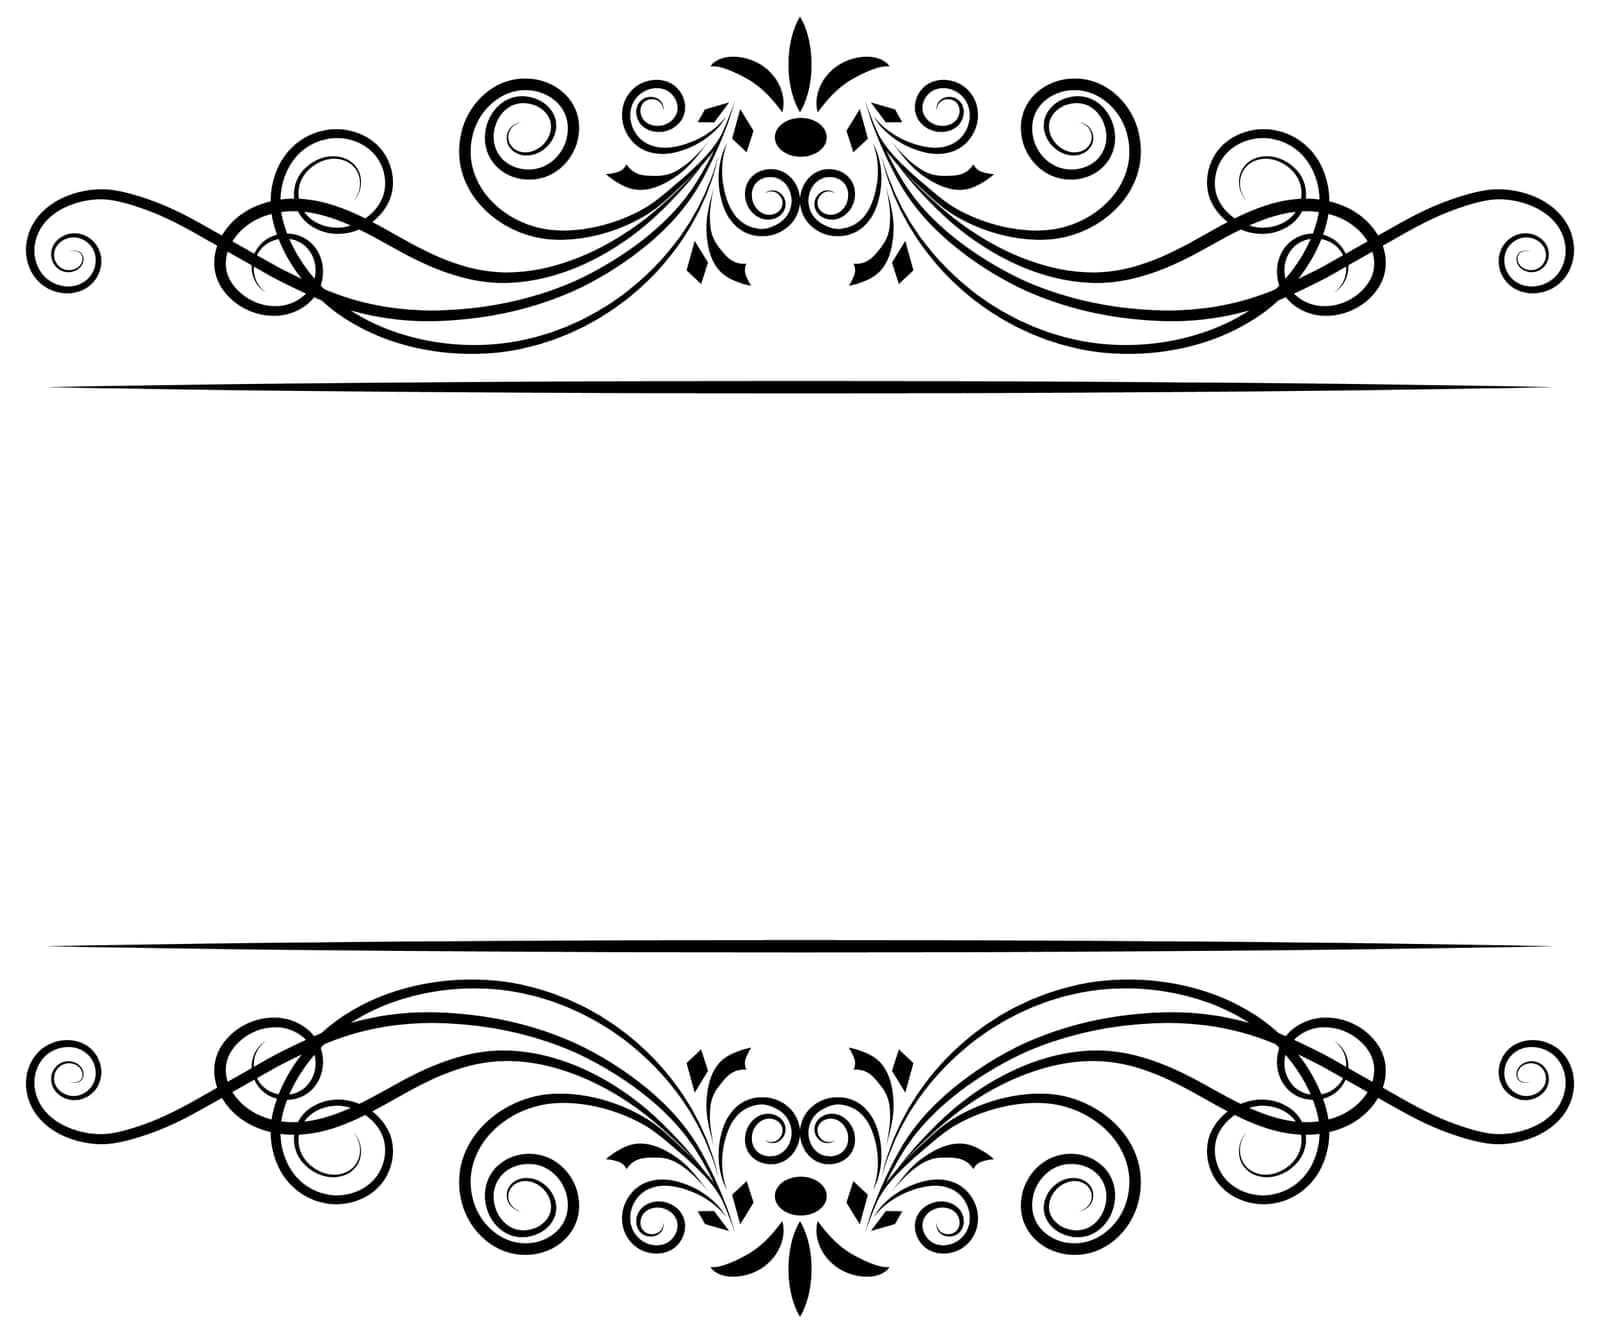 Vector frame and vignette for design template. Element in Victorian style. Ornate decor for invitations, greeting cards, certificate, thank you message.